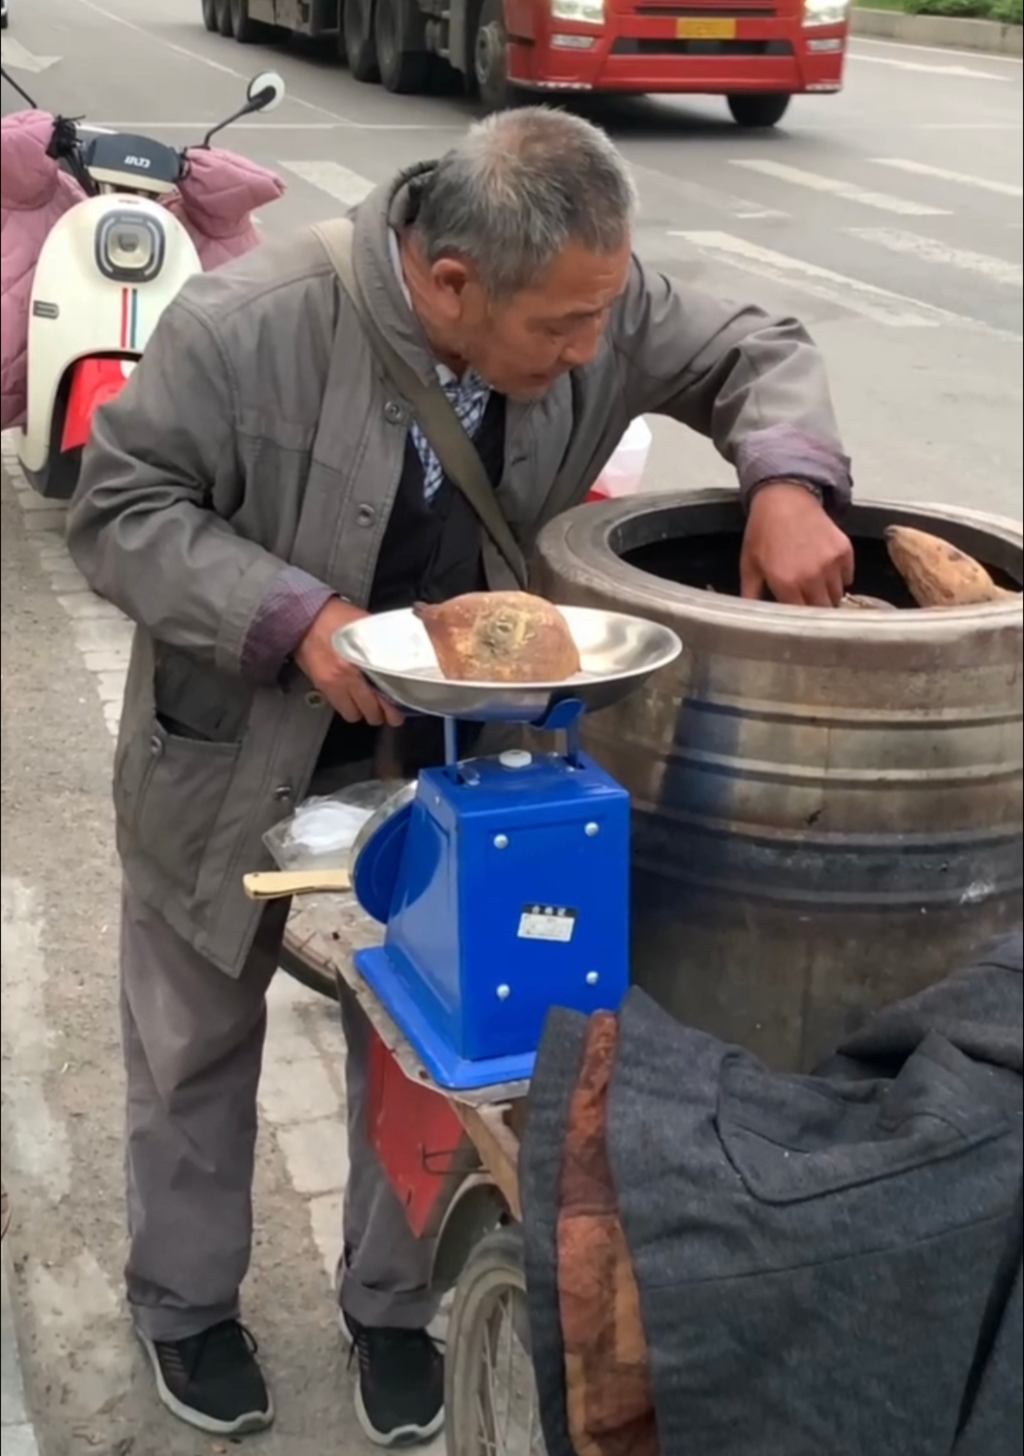 The old grandpa was selling sweet potatoes by the roadside. (Photo provided by the interviewee)